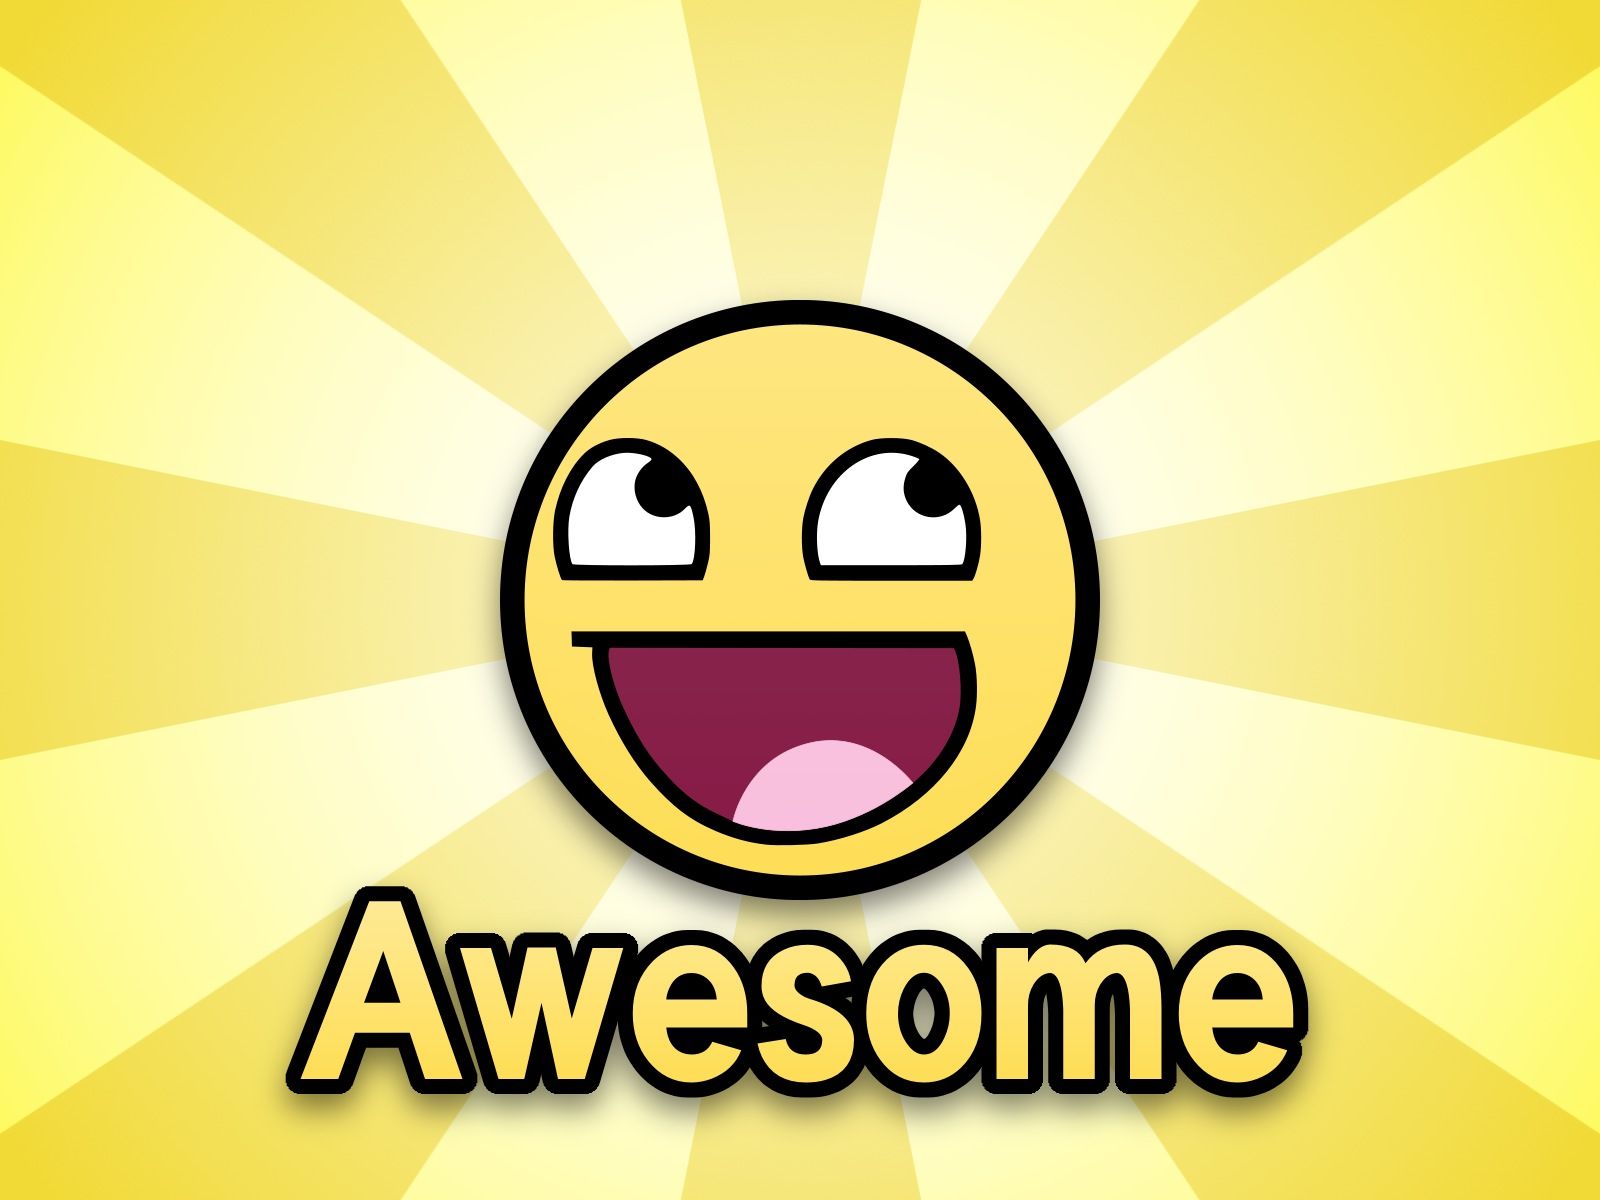 Smiley Awesome Beams Cool Cute Face Meme Nice Wallpaper Yellow